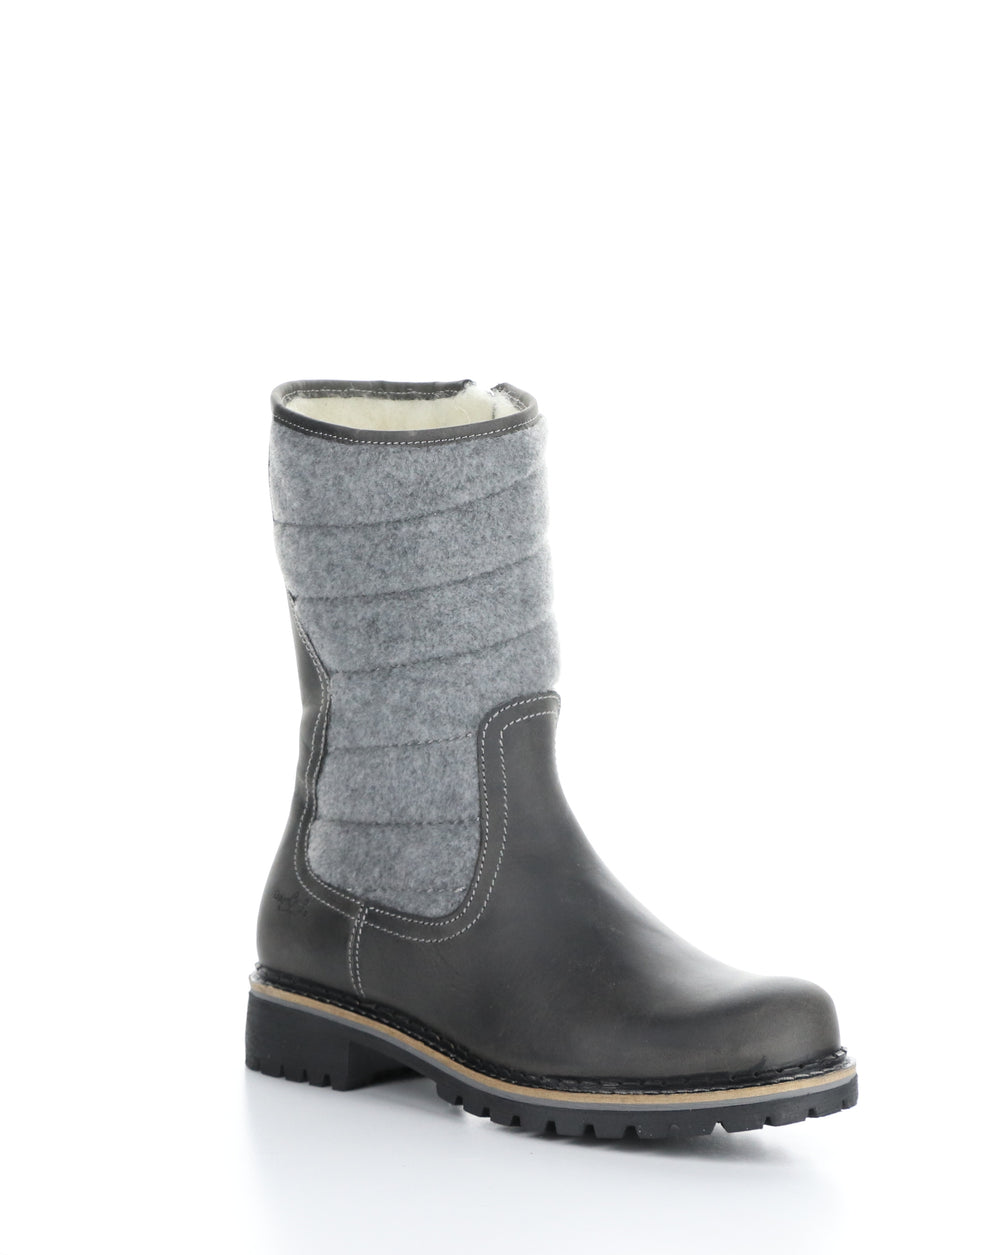 HARLYN GREY Round Toe Boots